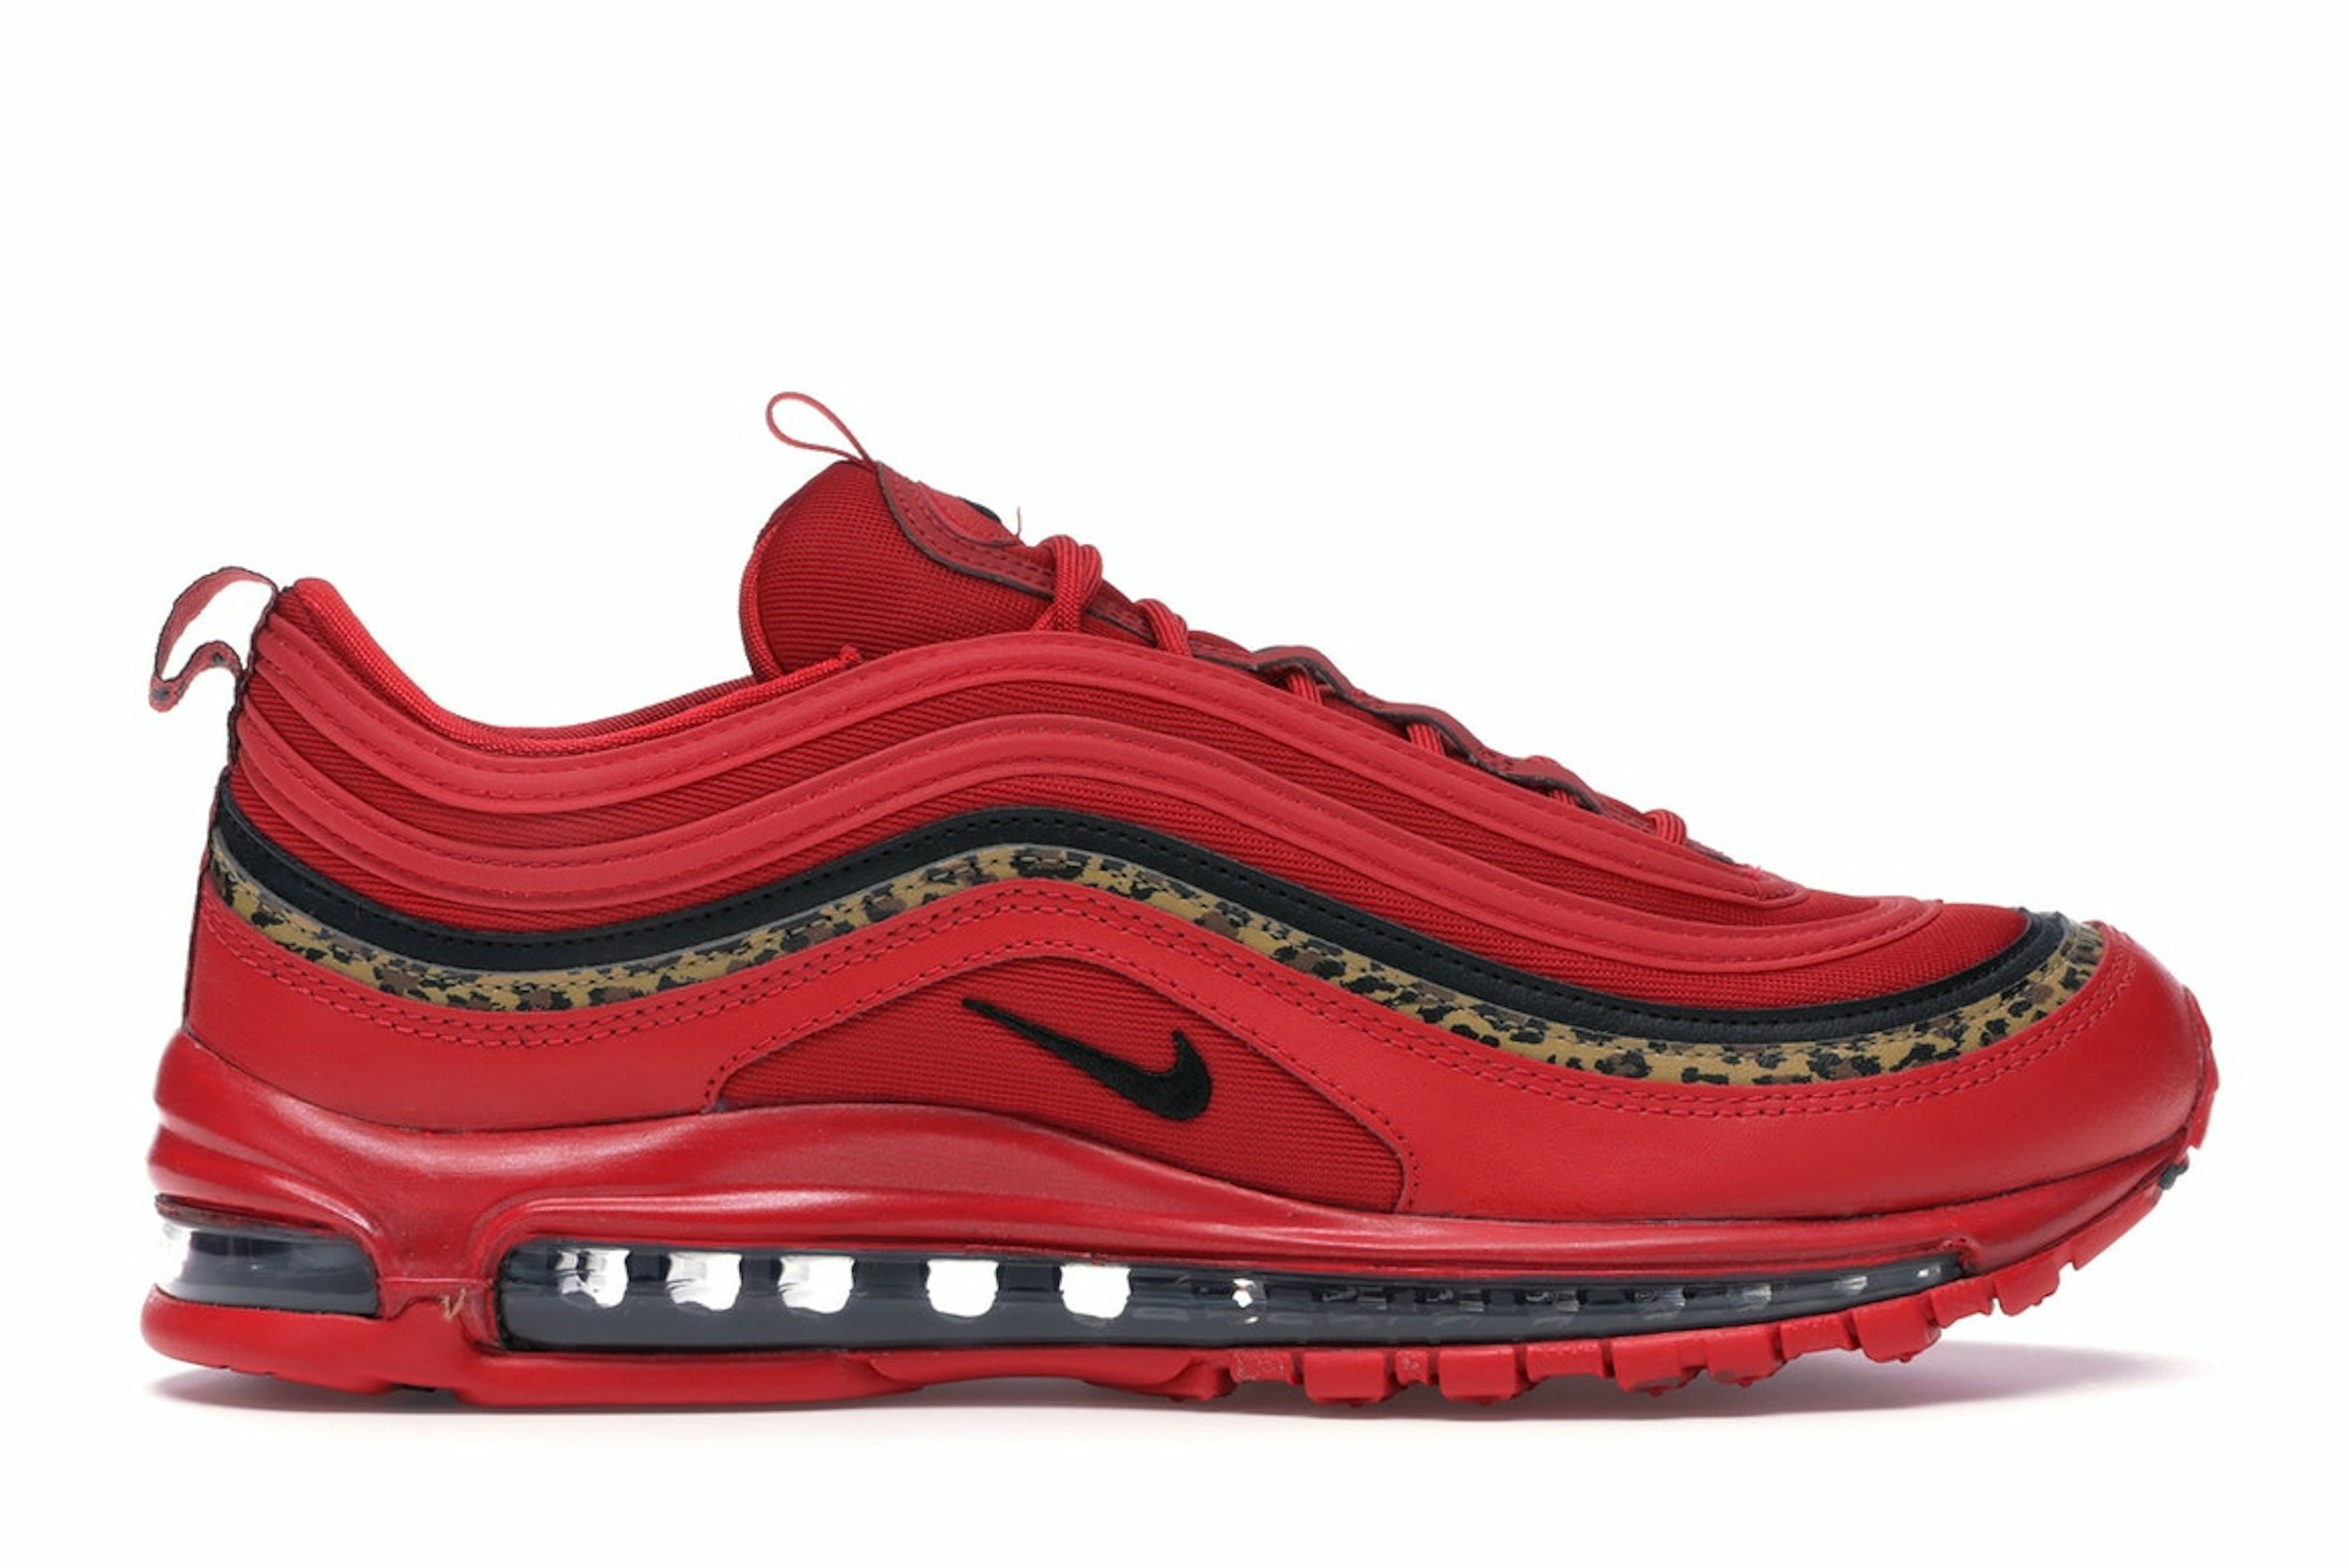 Nike Air Max 97 Leopard Pack Red (W) - BV6113-600